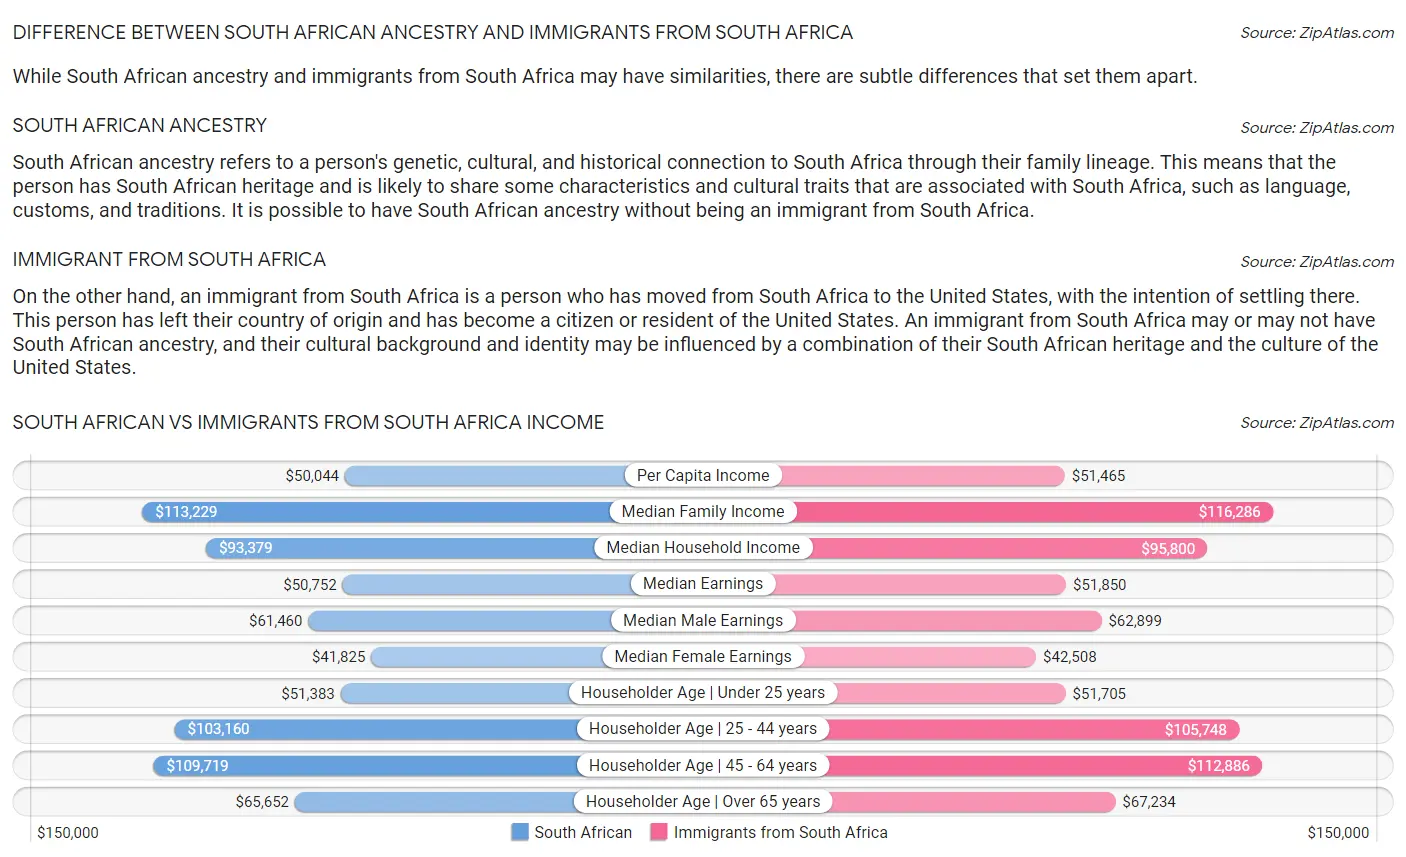 South African vs Immigrants from South Africa Income